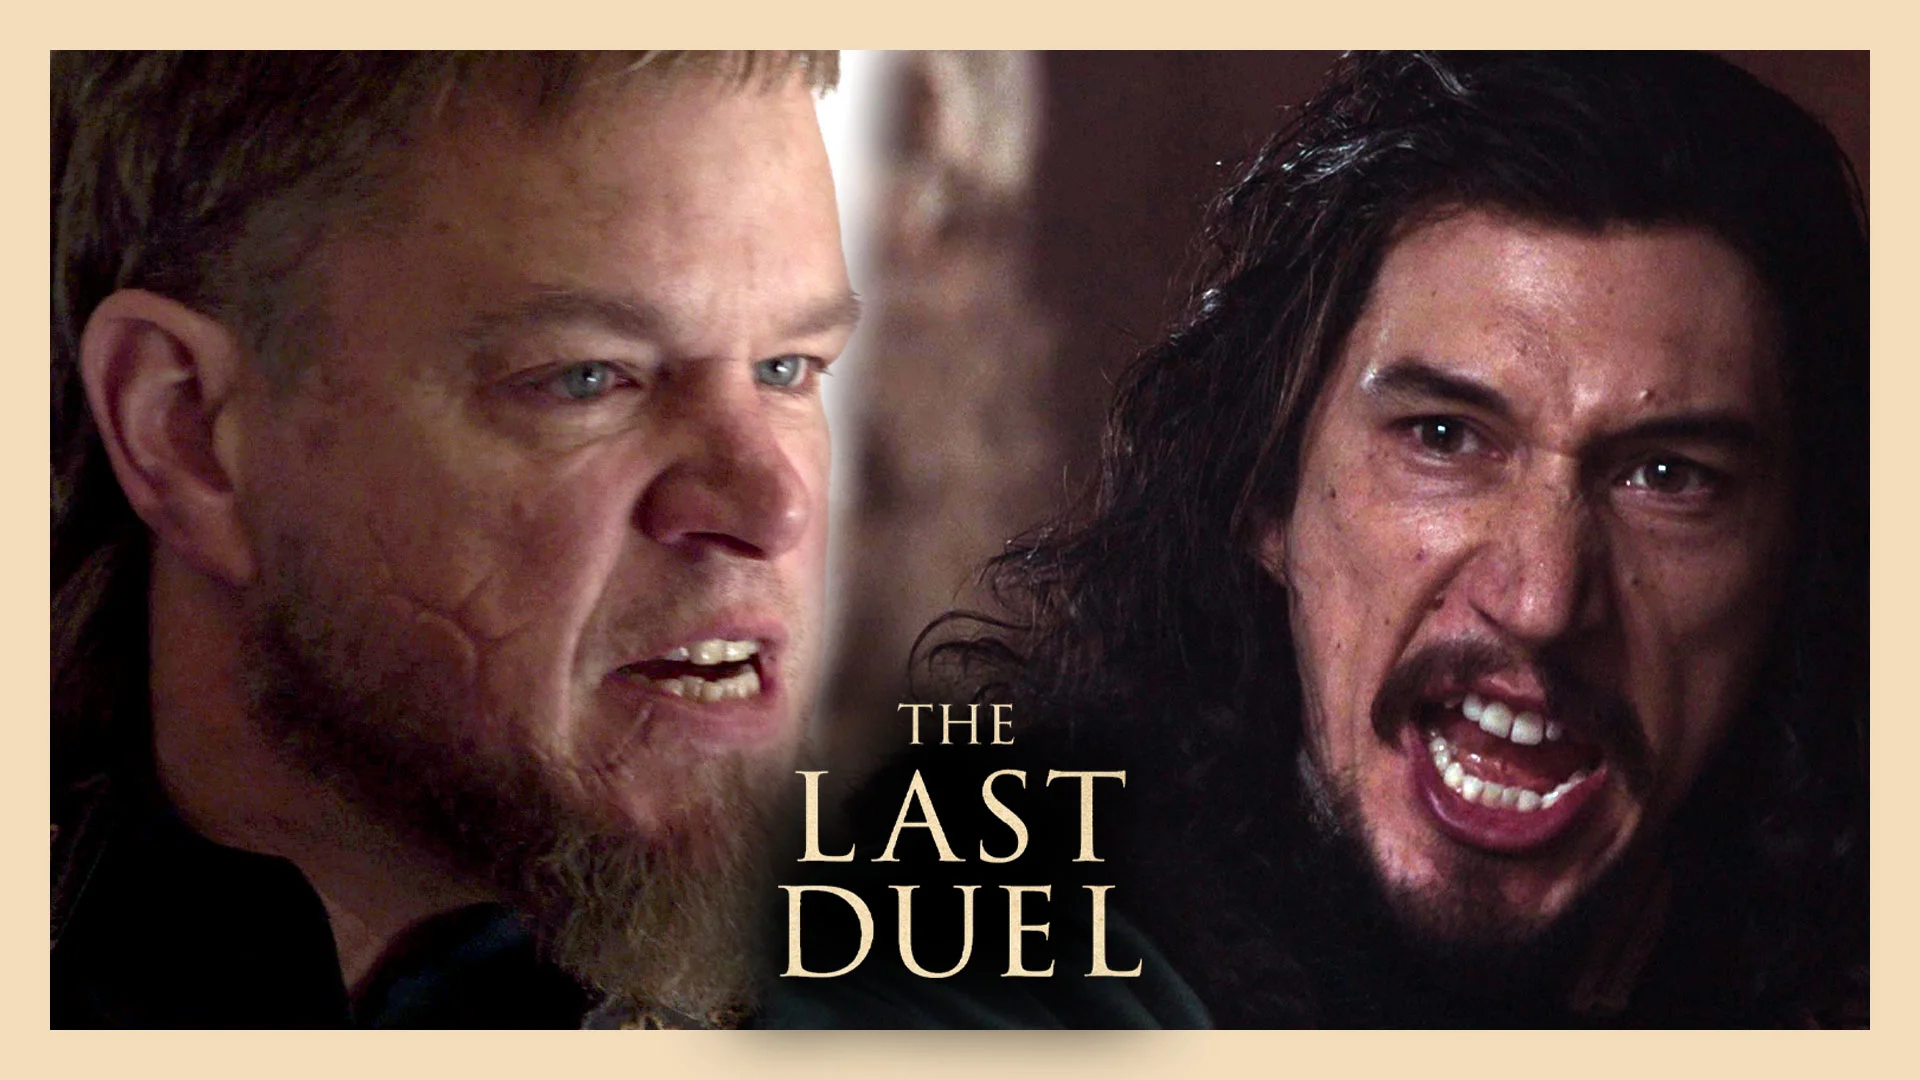 The Last Duel: Everything We Know